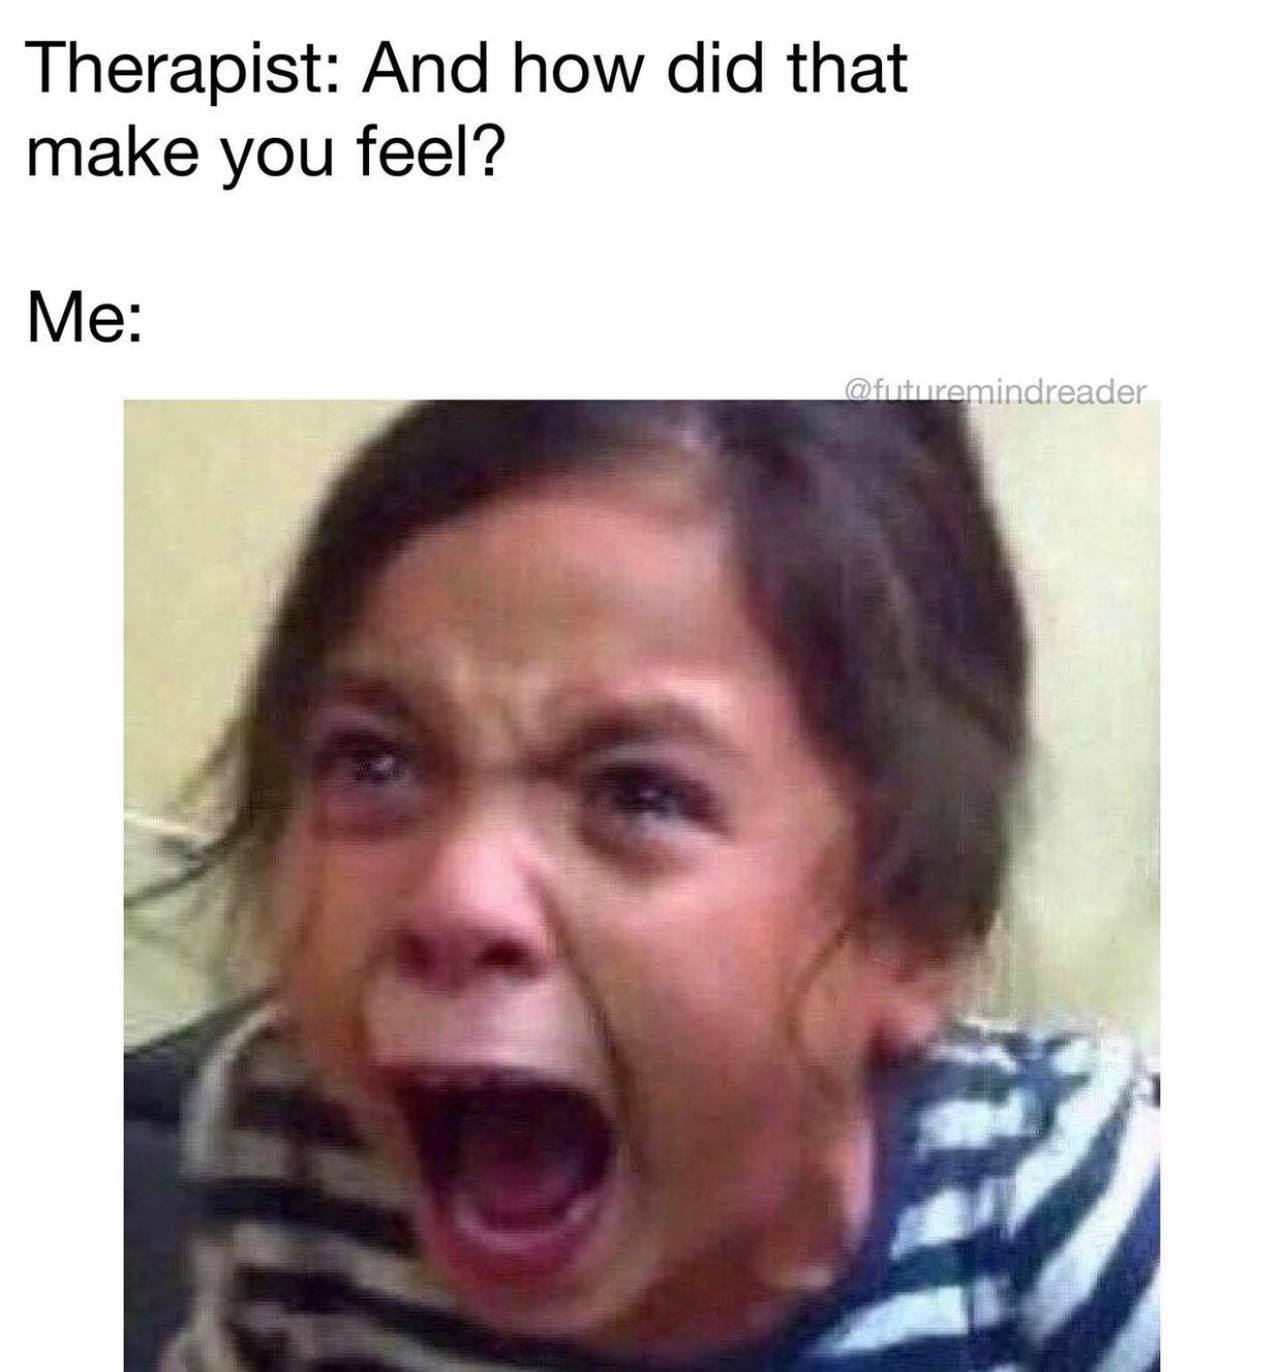 feminist crying meme - Therapist And how did that make you feel? Me